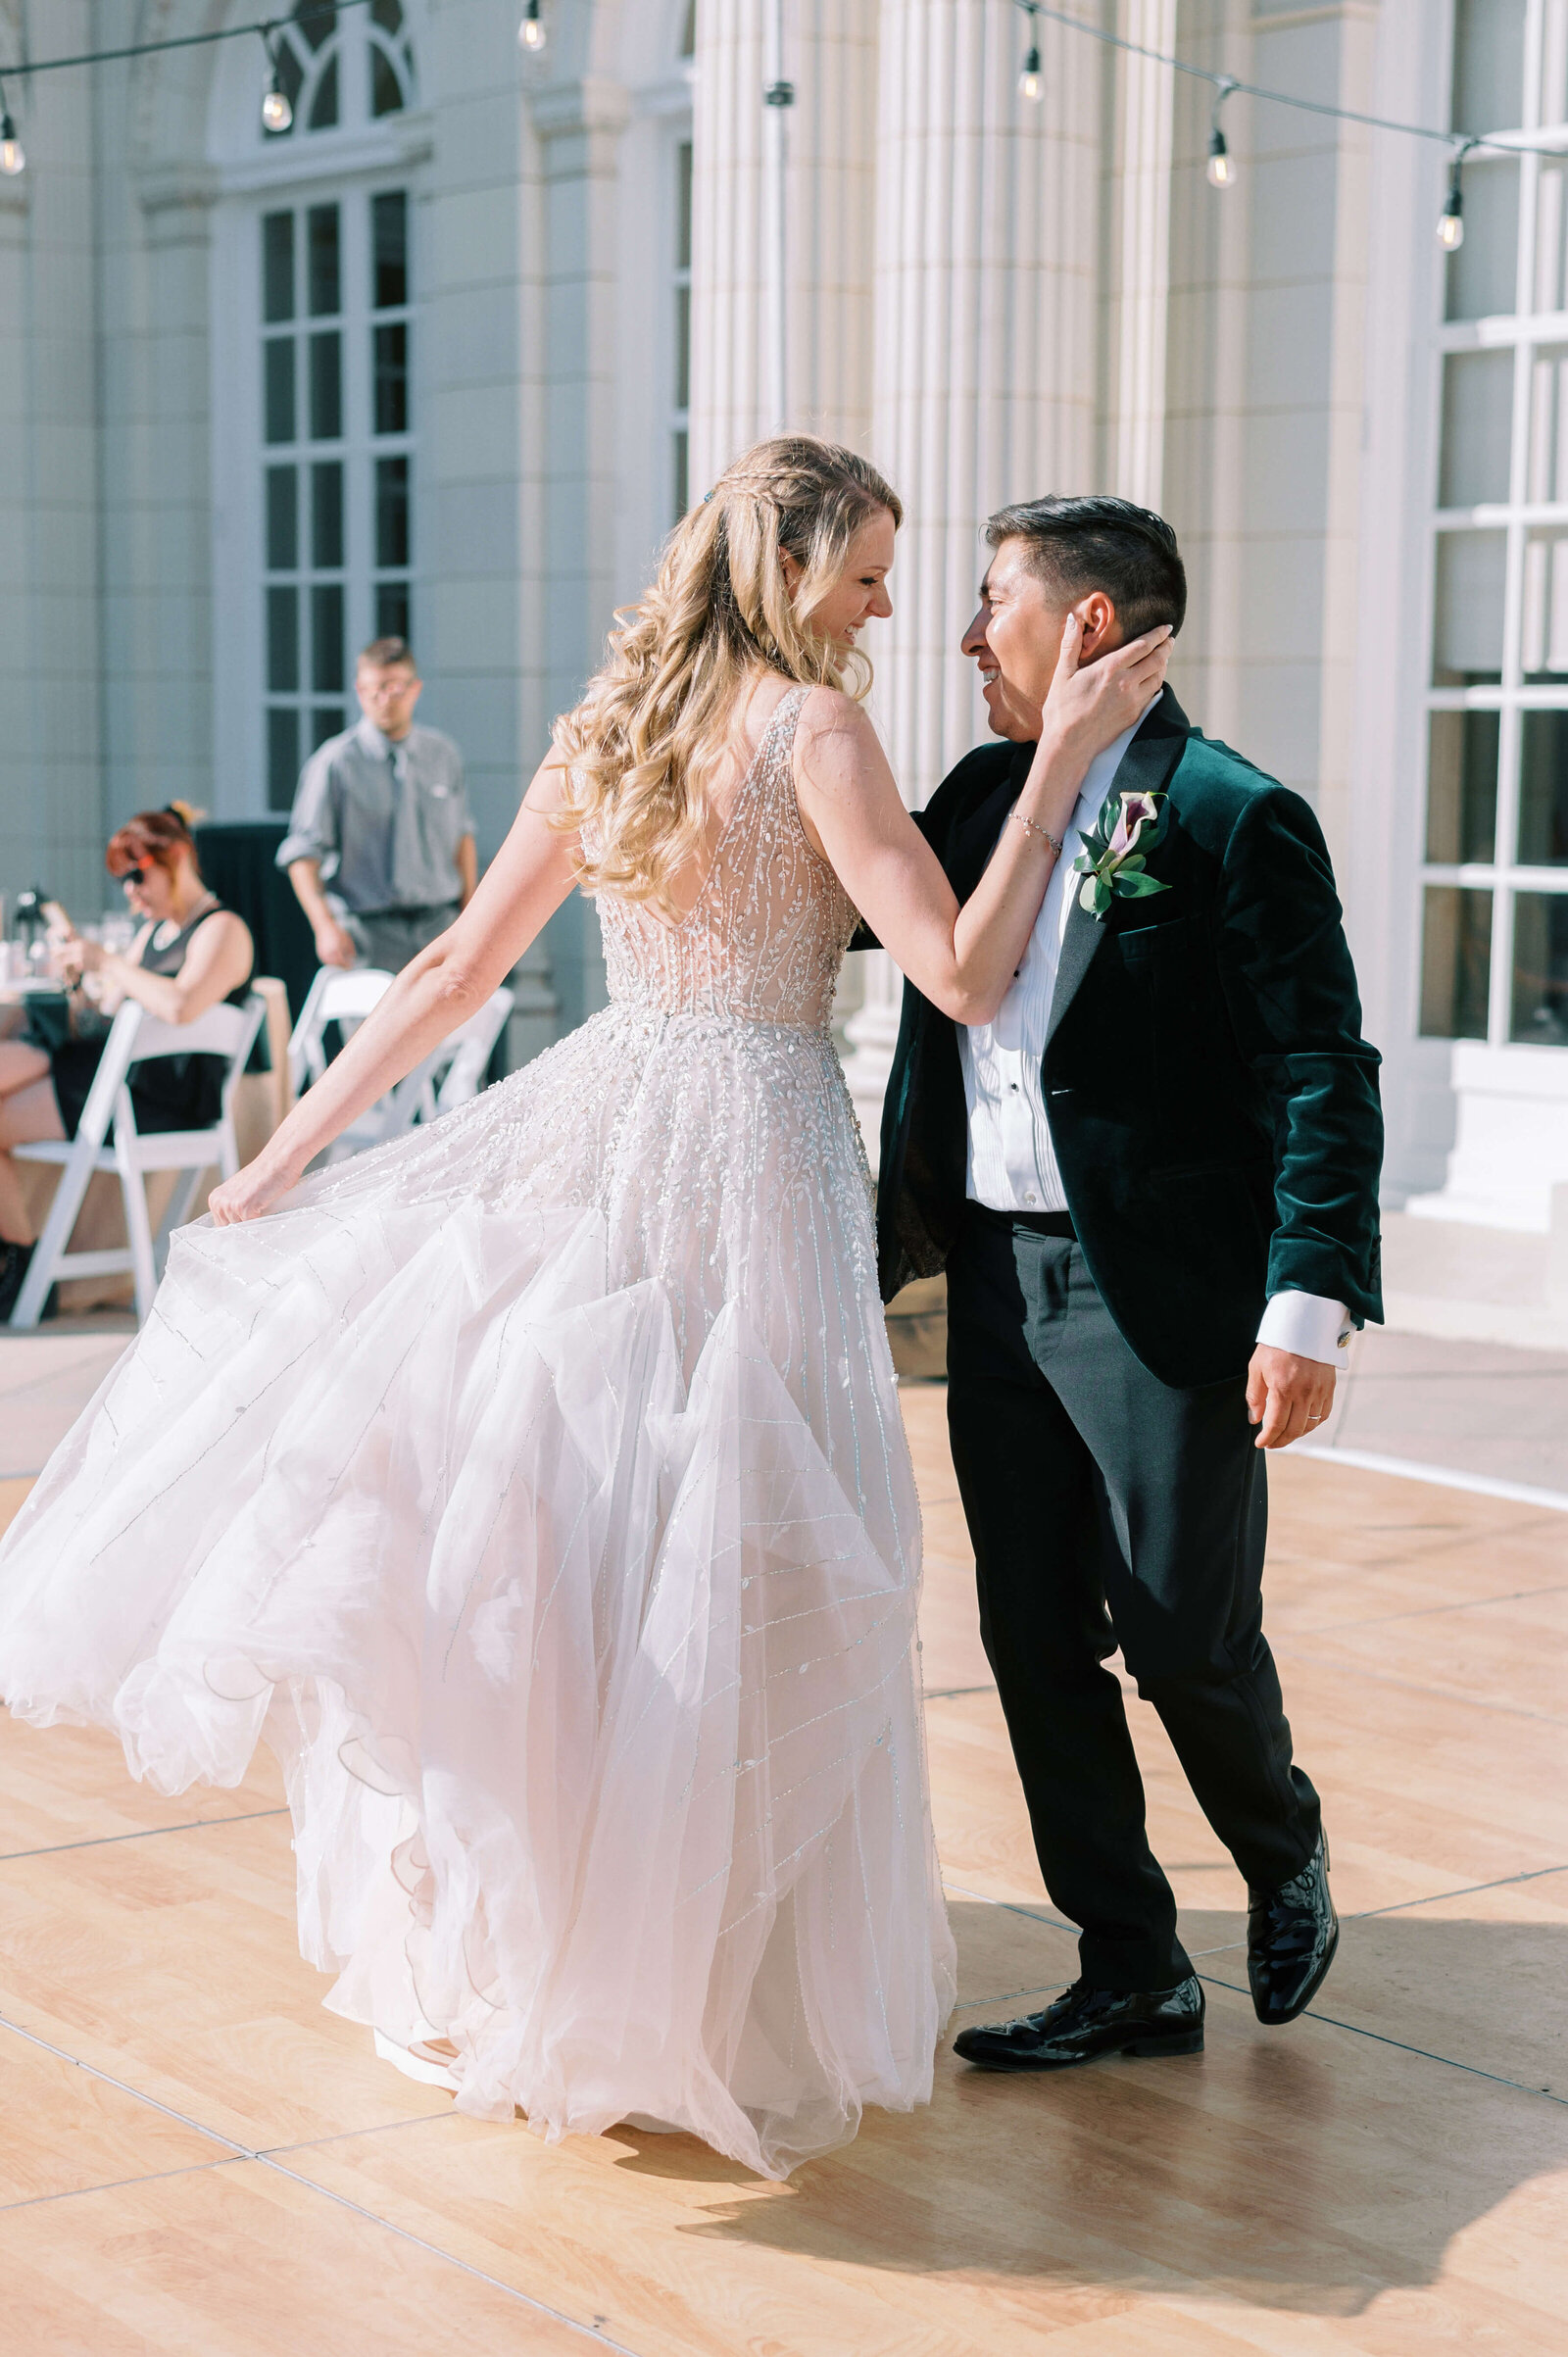 newlywed bride and groom dance together during their first dance at their virginia wedding